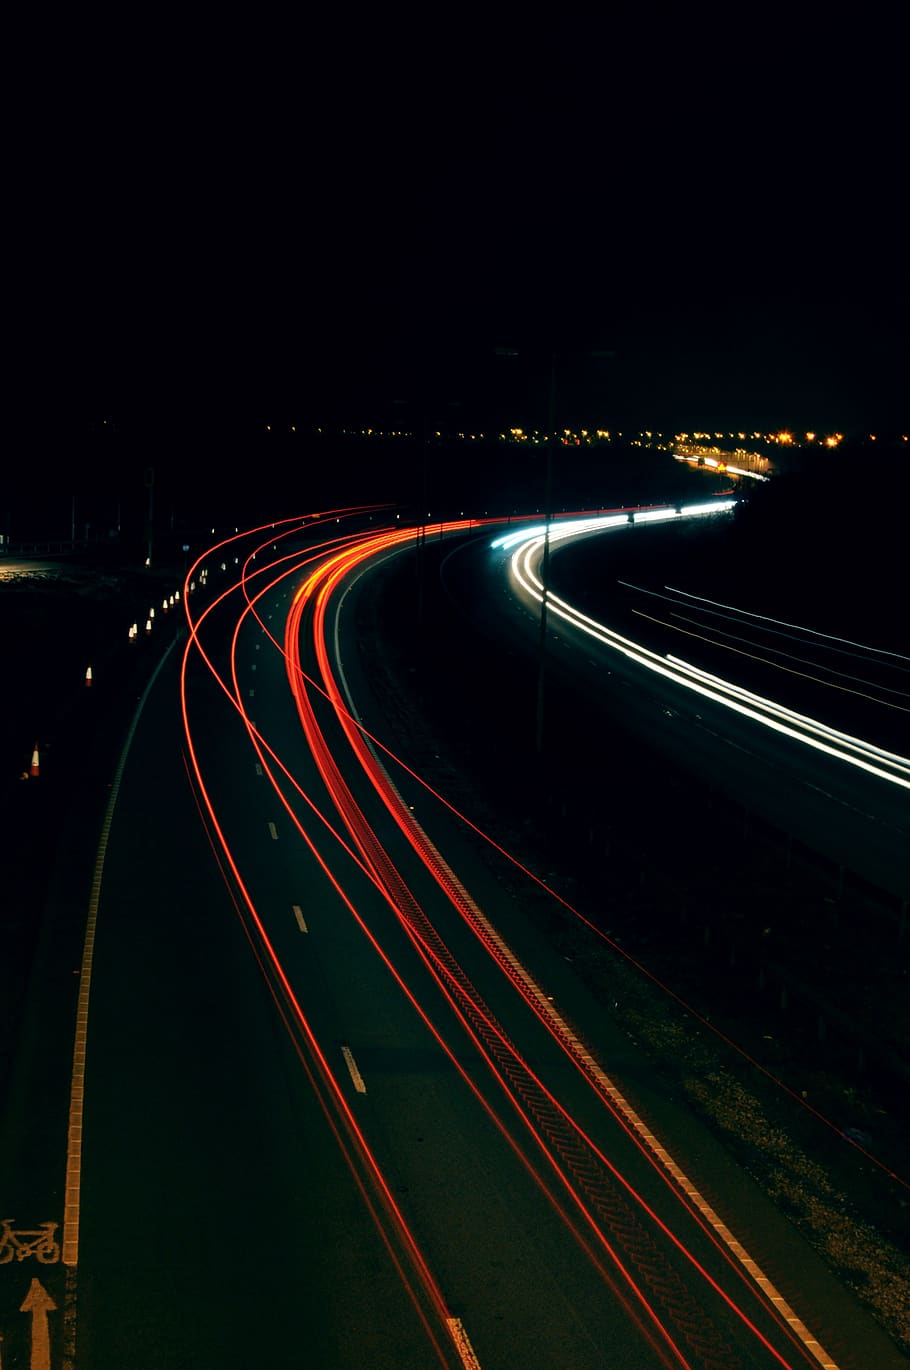 Time Lapse Photography, action, car lights, cars, dark, exposure